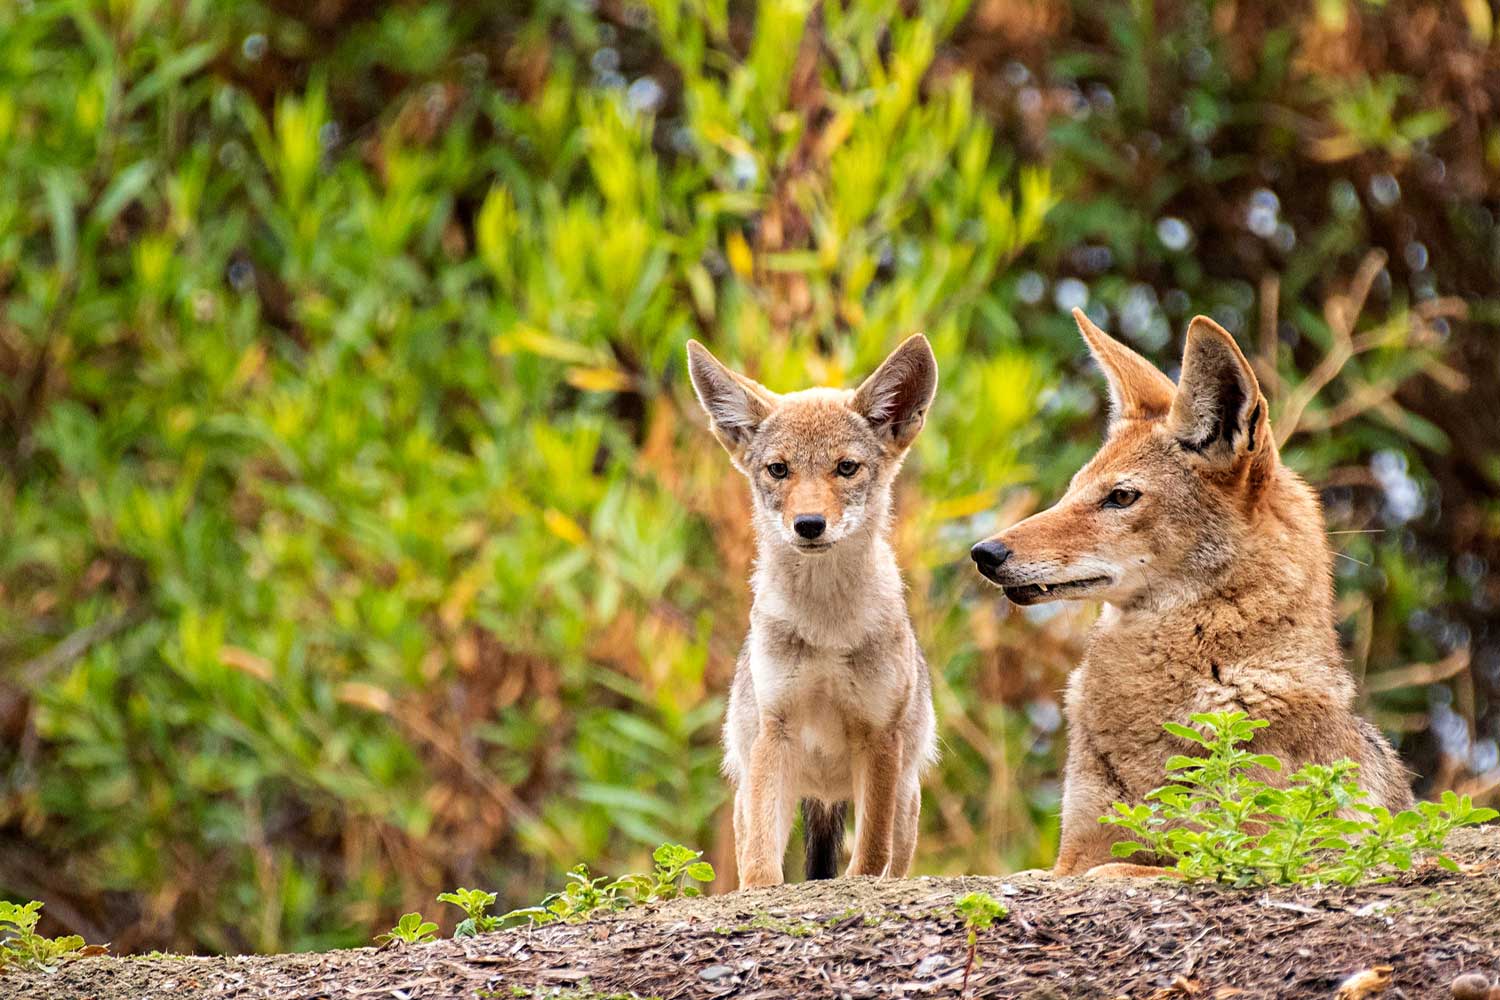 A coyote and its pup in a forest.